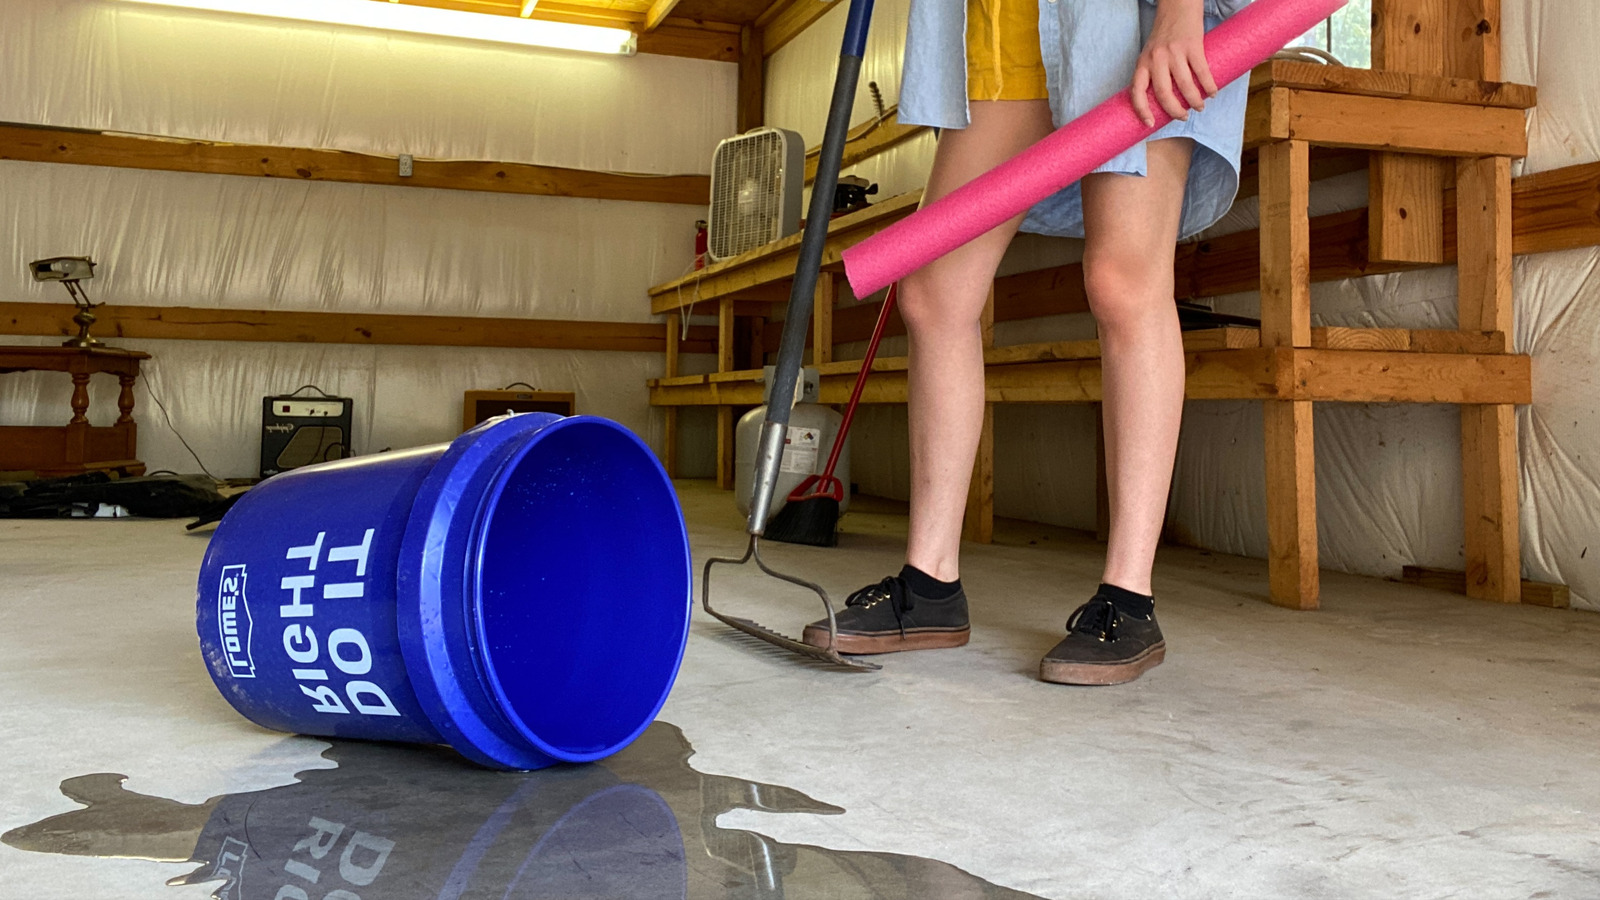 We Tried Making A Squeegee From A Rake And A Pool Noodle With Positive Results – House Digest